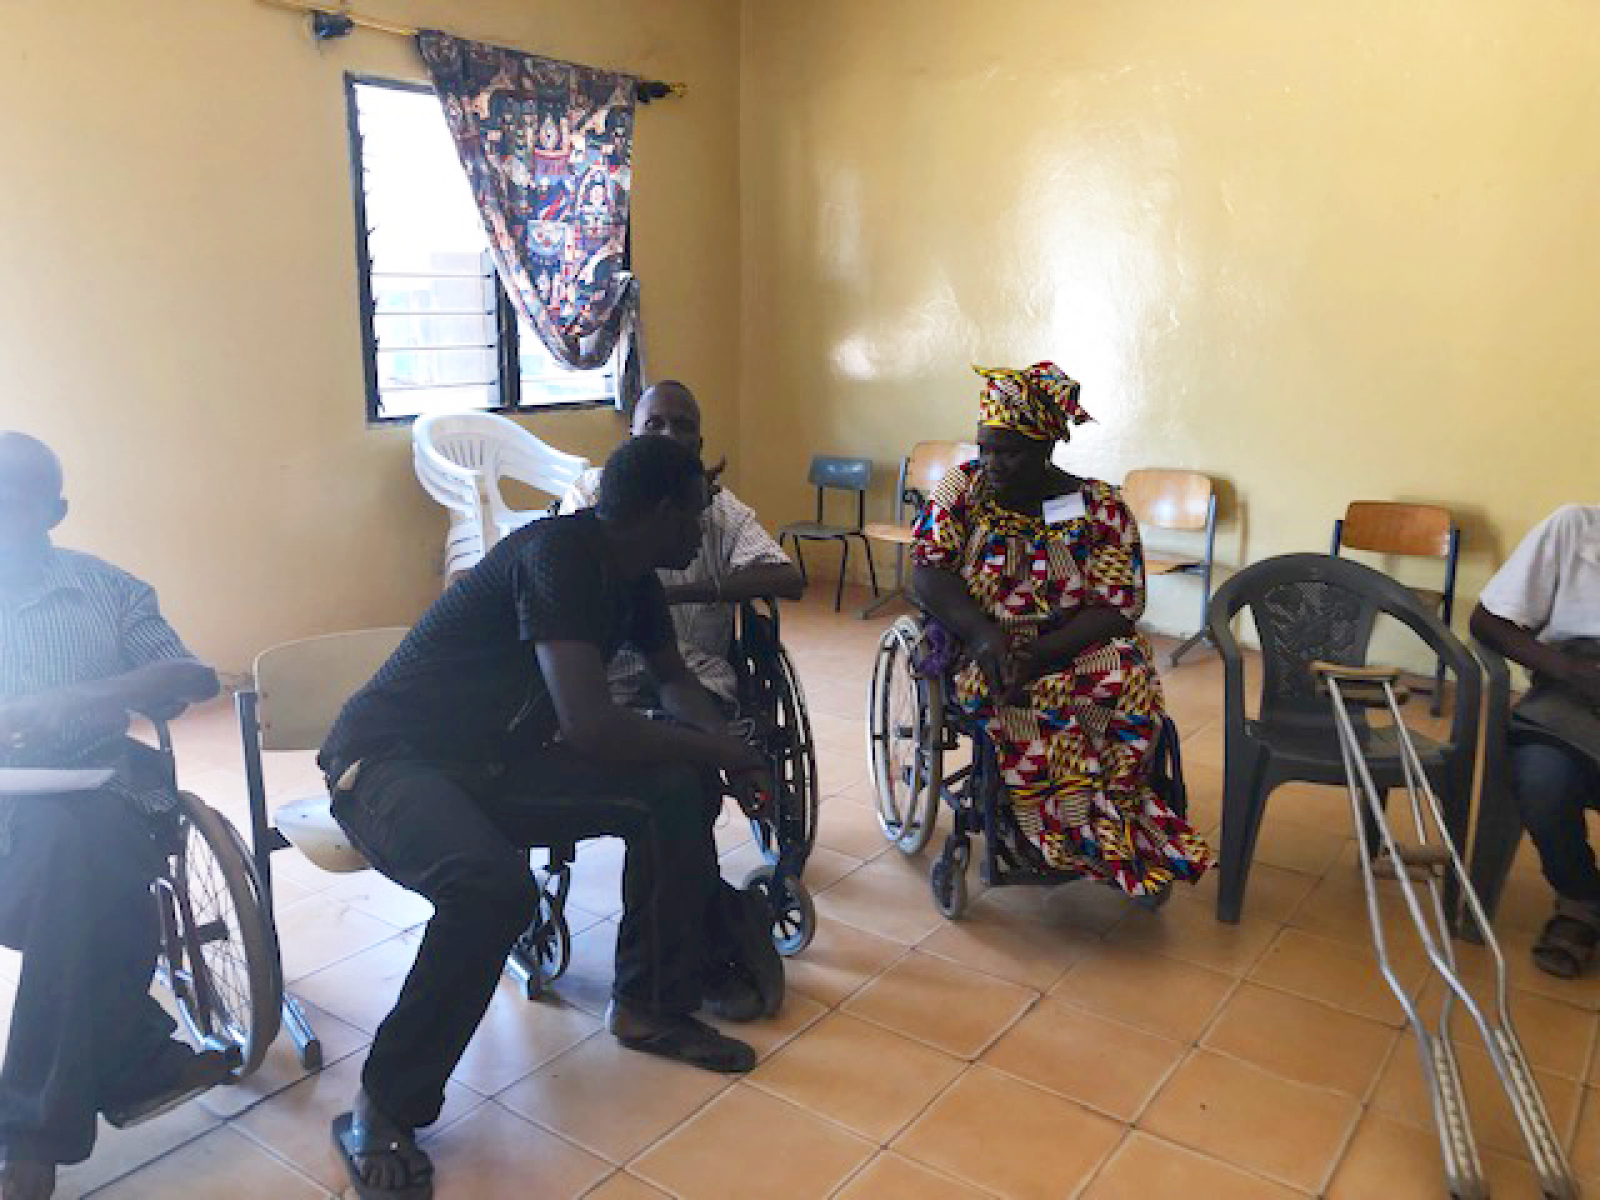 Disabled Persons Organizations Building a More Inclusive Gambia